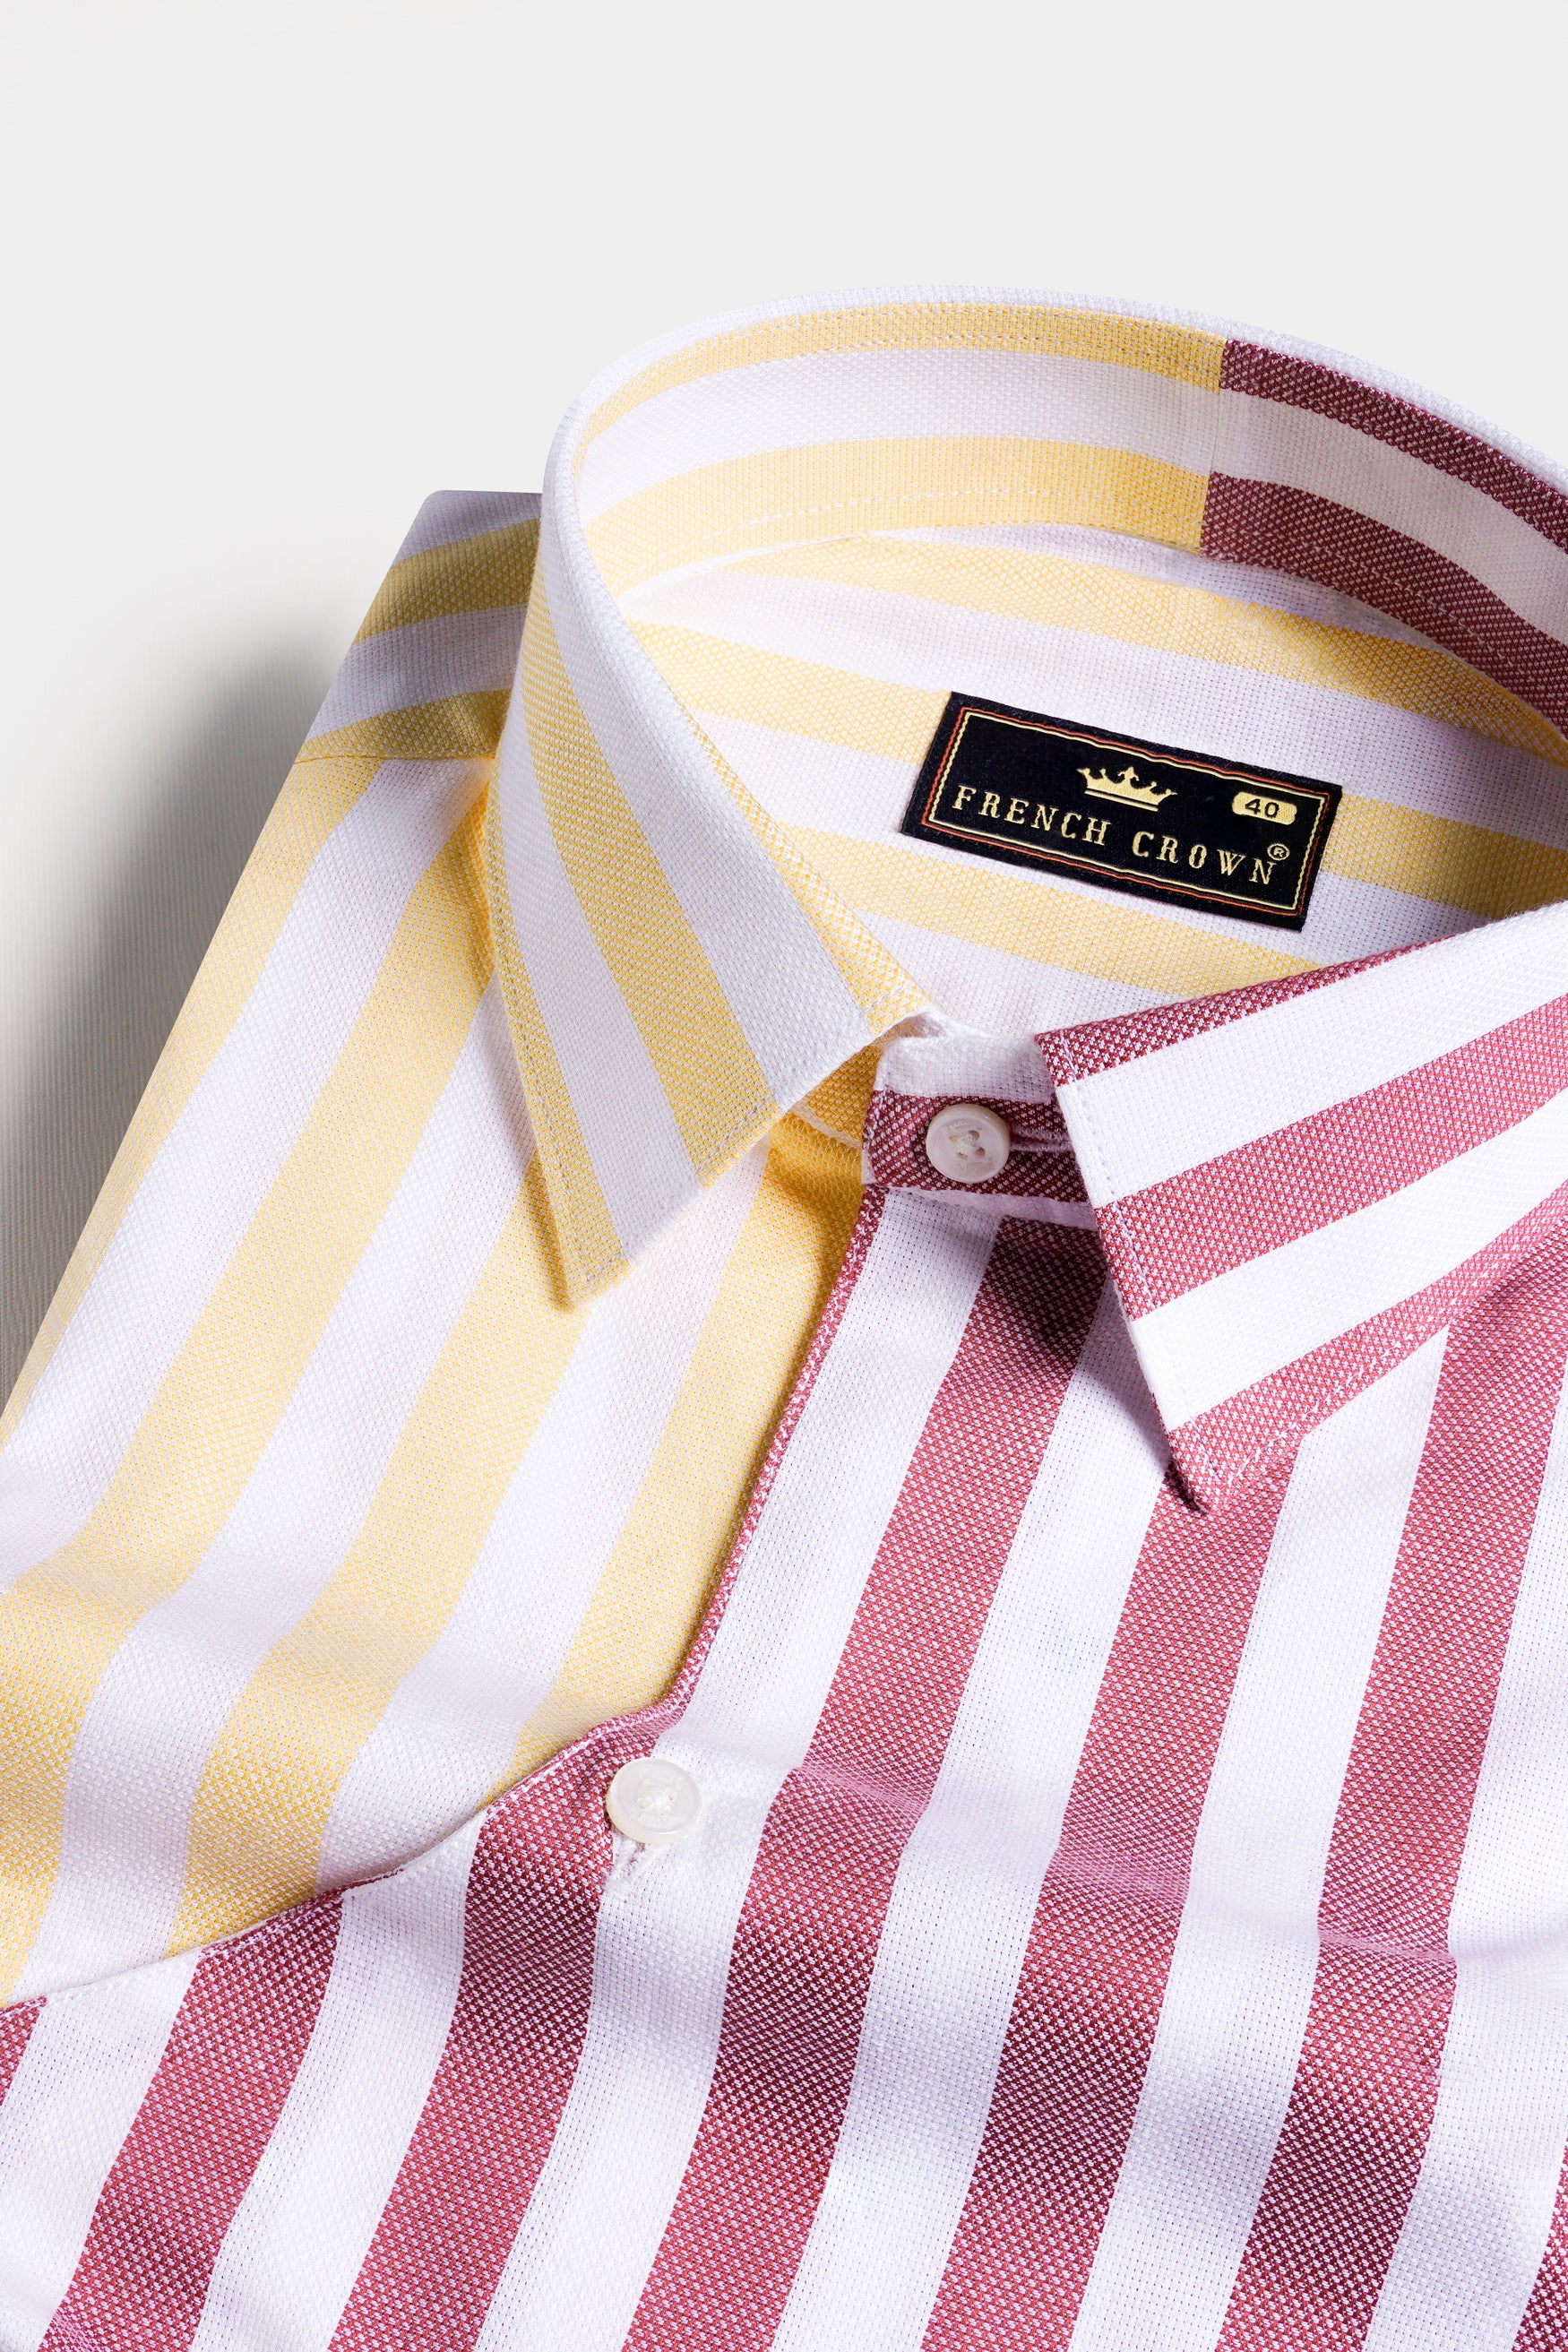 Hibiscus Pink with White and Navajo Yellow Striped Dobby Textured Premium Giza Cotton Designer Shirt 11710-D9-38, 11710-D9-H-38, 11710-D9-39, 11710-D9-H-39, 11710-D9-40, 11710-D9-H-40, 11710-D9-42, 11710-D9-H-42, 11710-D9-44, 11710-D9-H-44, 11710-D9-46, 11710-D9-H-46, 11710-D9-48, 11710-D9-H-48, 11710-D9-50, 11710-D9-H-50, 11710-D9-52, 11710-D9-H-52